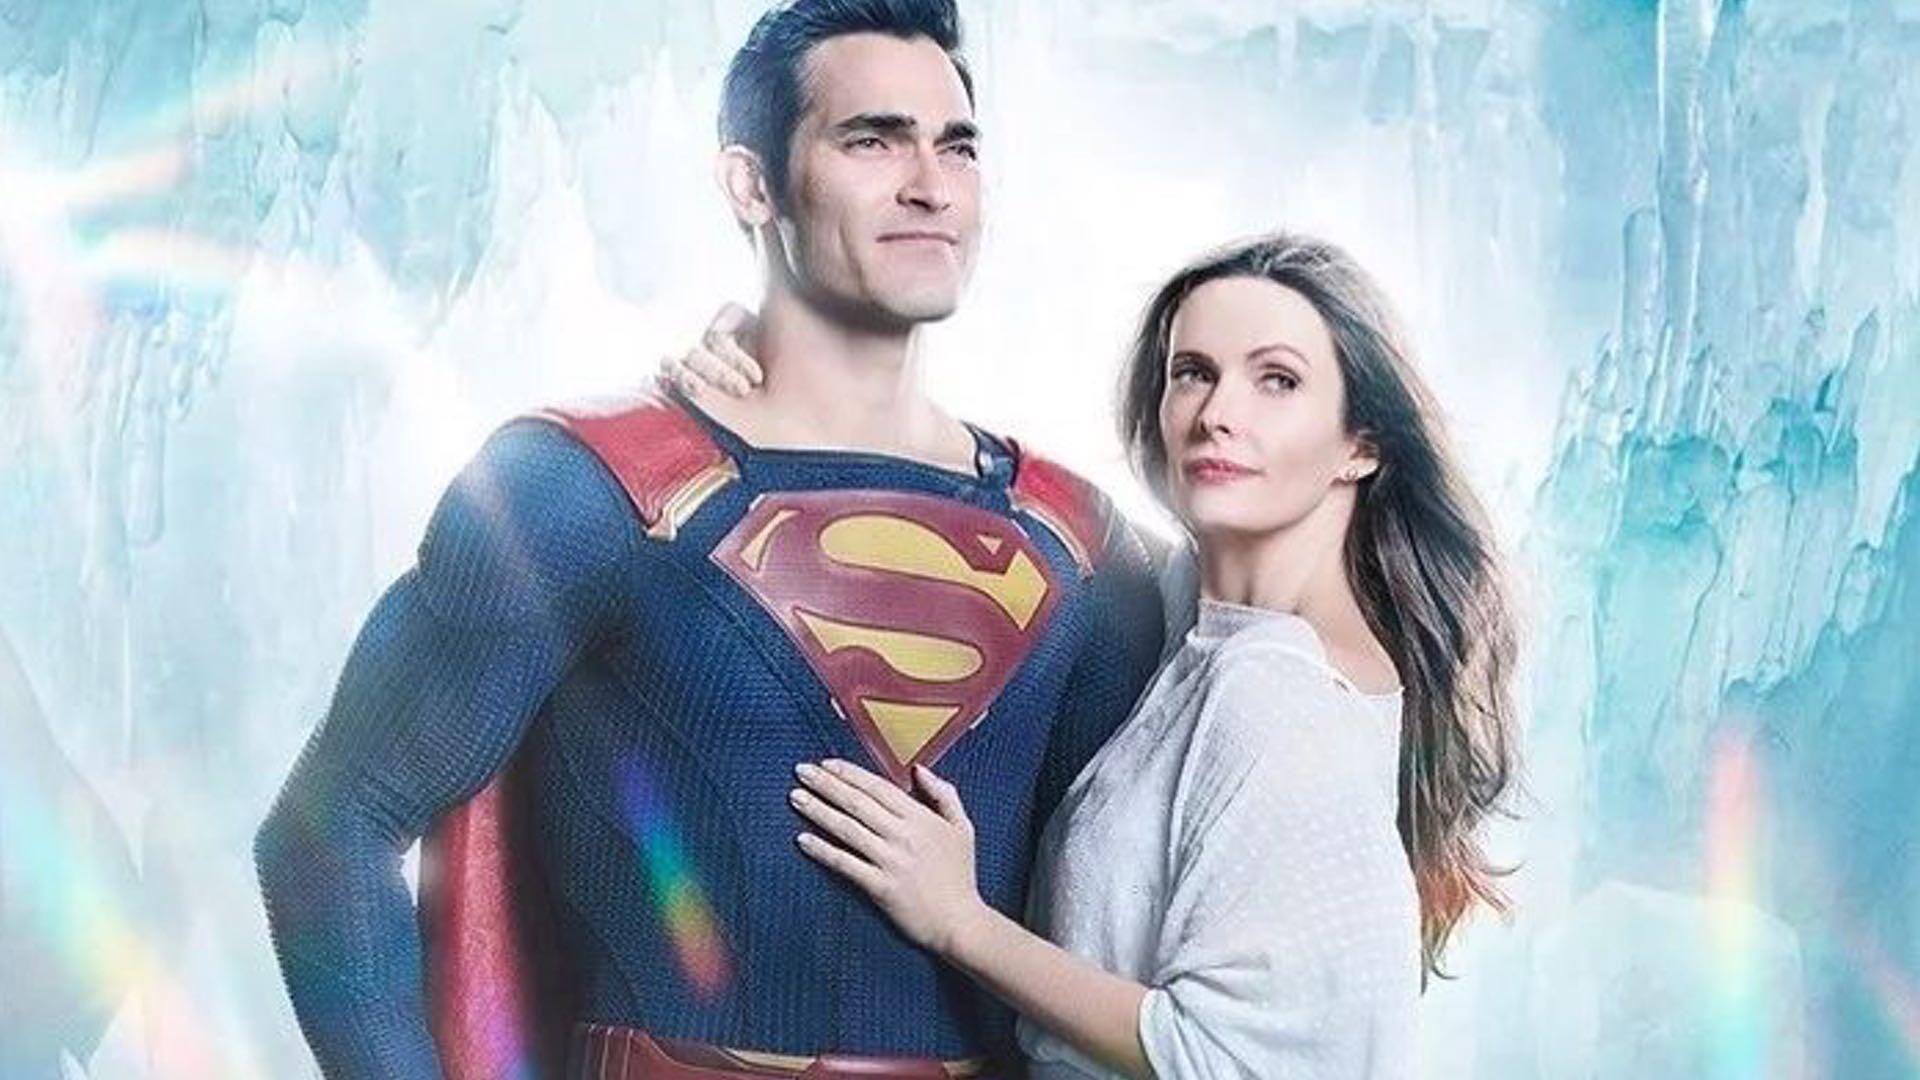 New Superman & Lois Lane TV series flying over to The CW